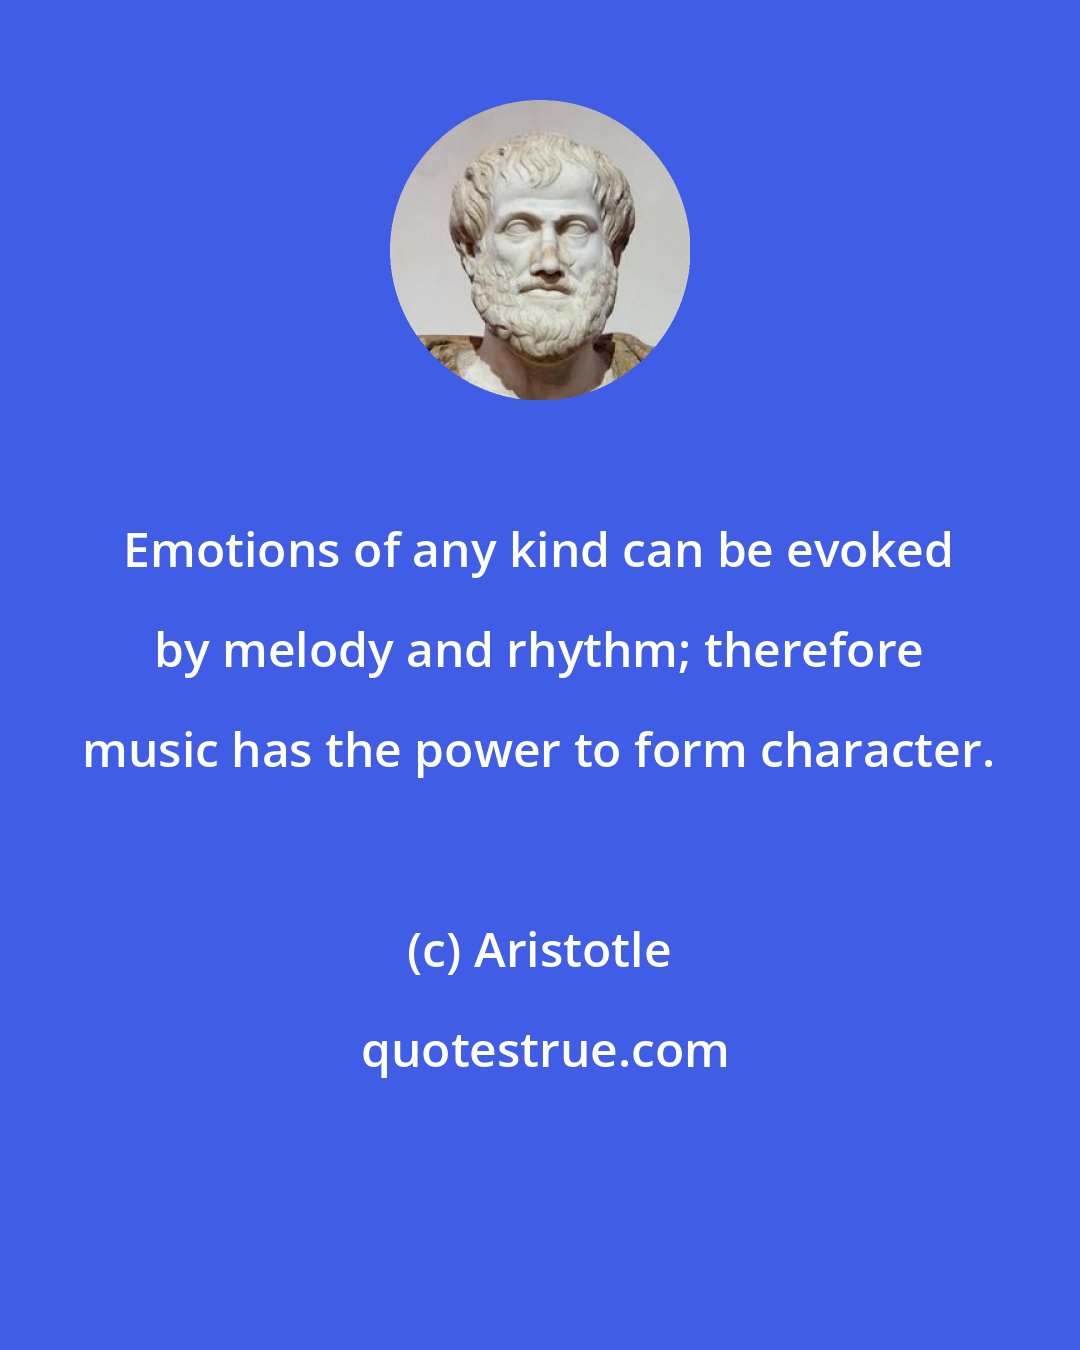 Aristotle: Emotions of any kind can be evoked by melody and rhythm; therefore music has the power to form character.